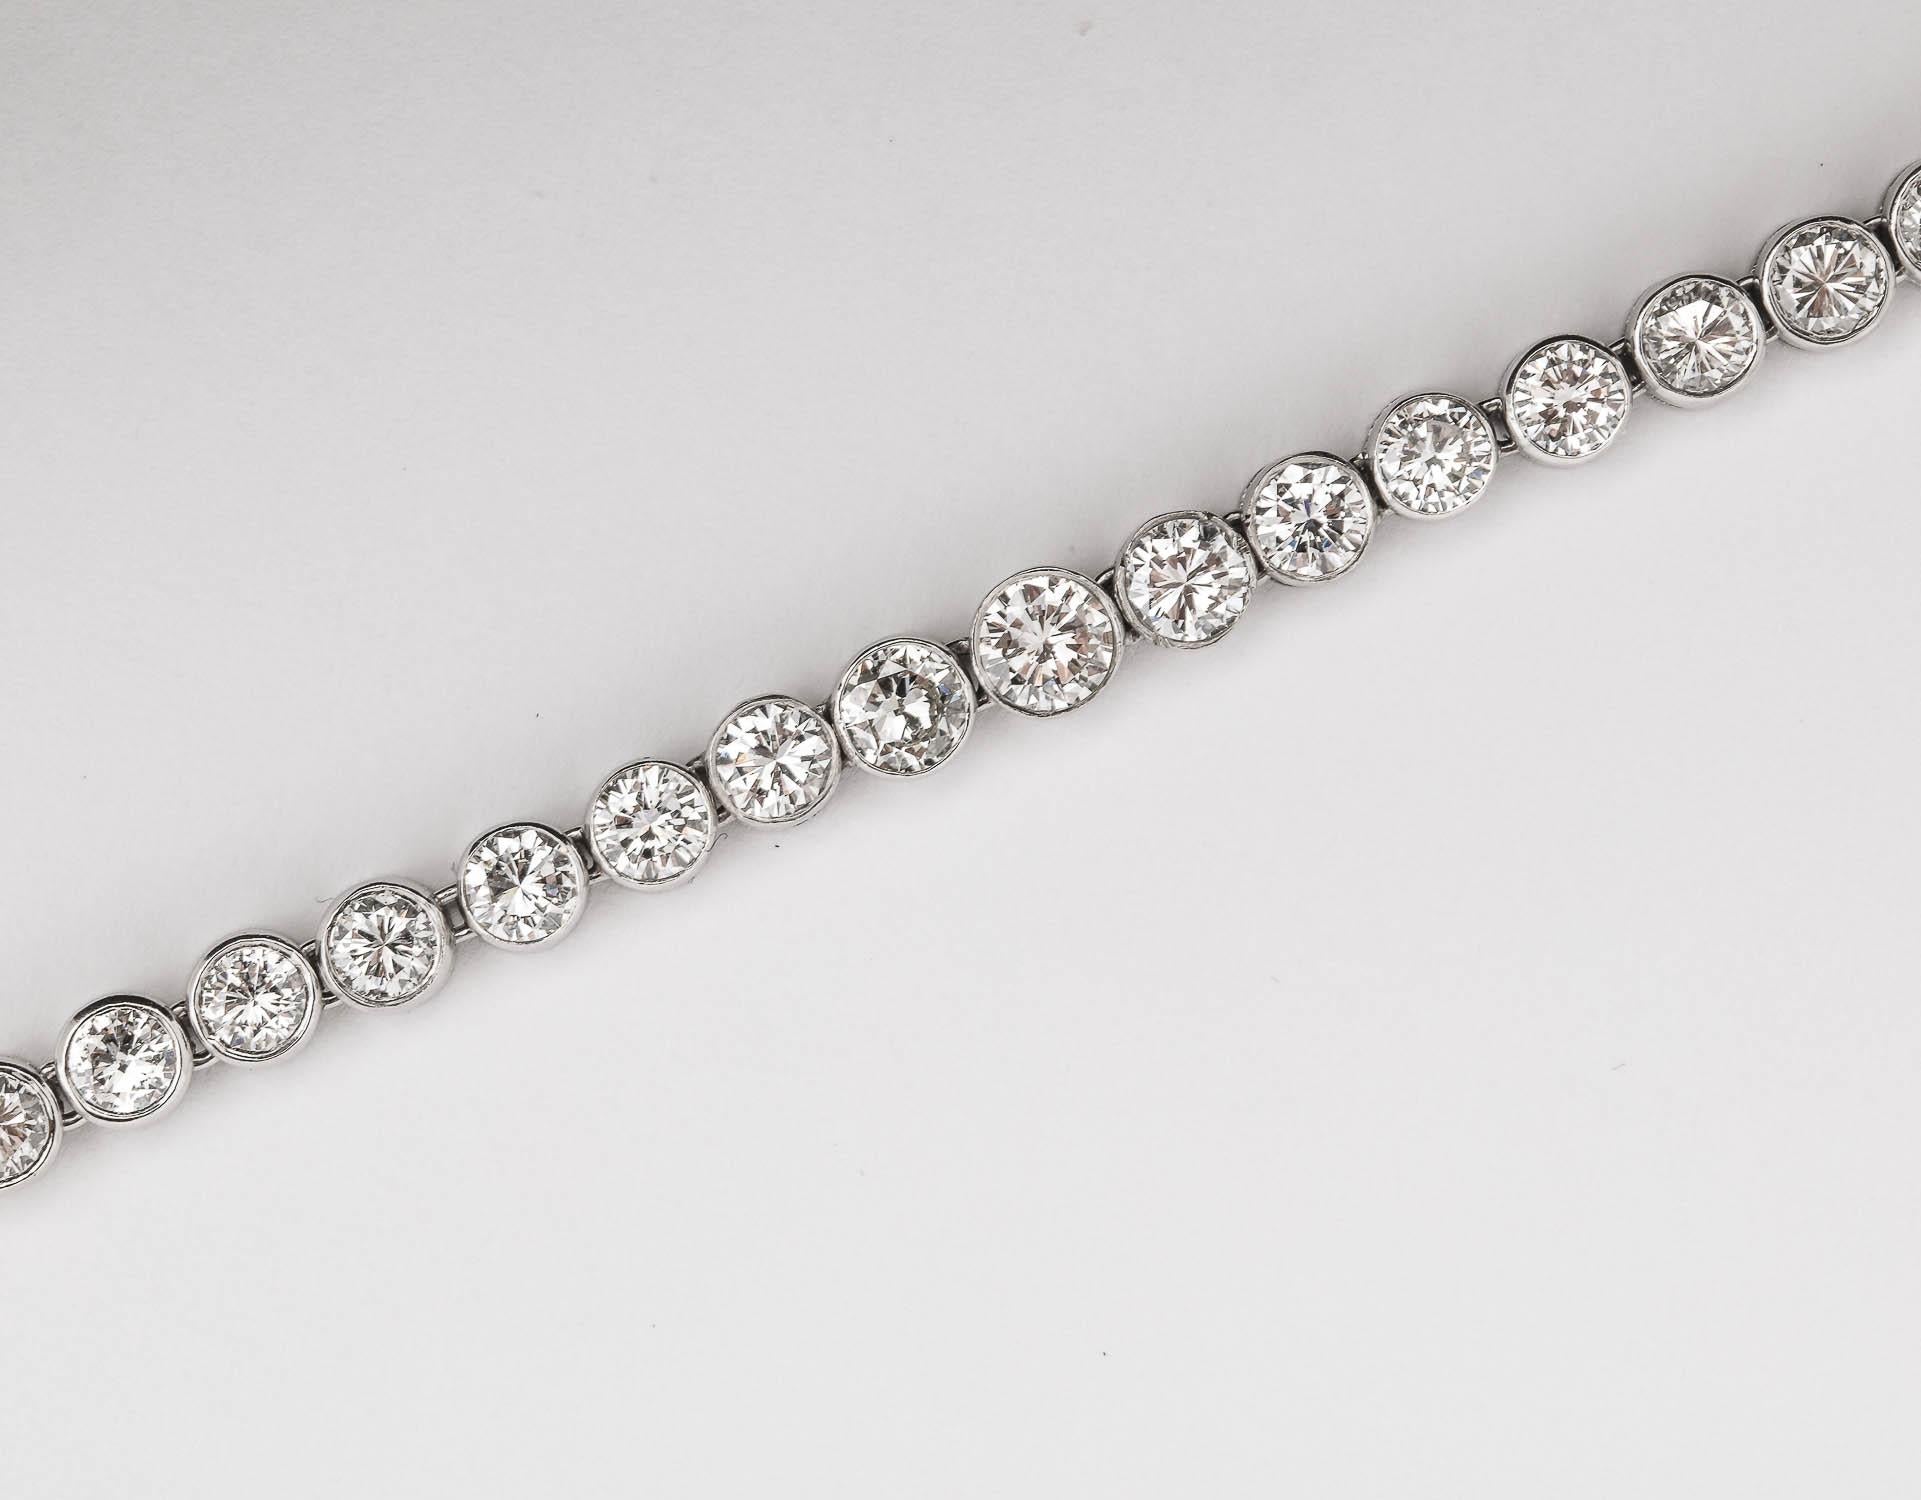 Diamond Necklace Bezel-Set in Platinum White Sparkling Diamonds Flower Clasp In Good Condition For Sale In New York, NY